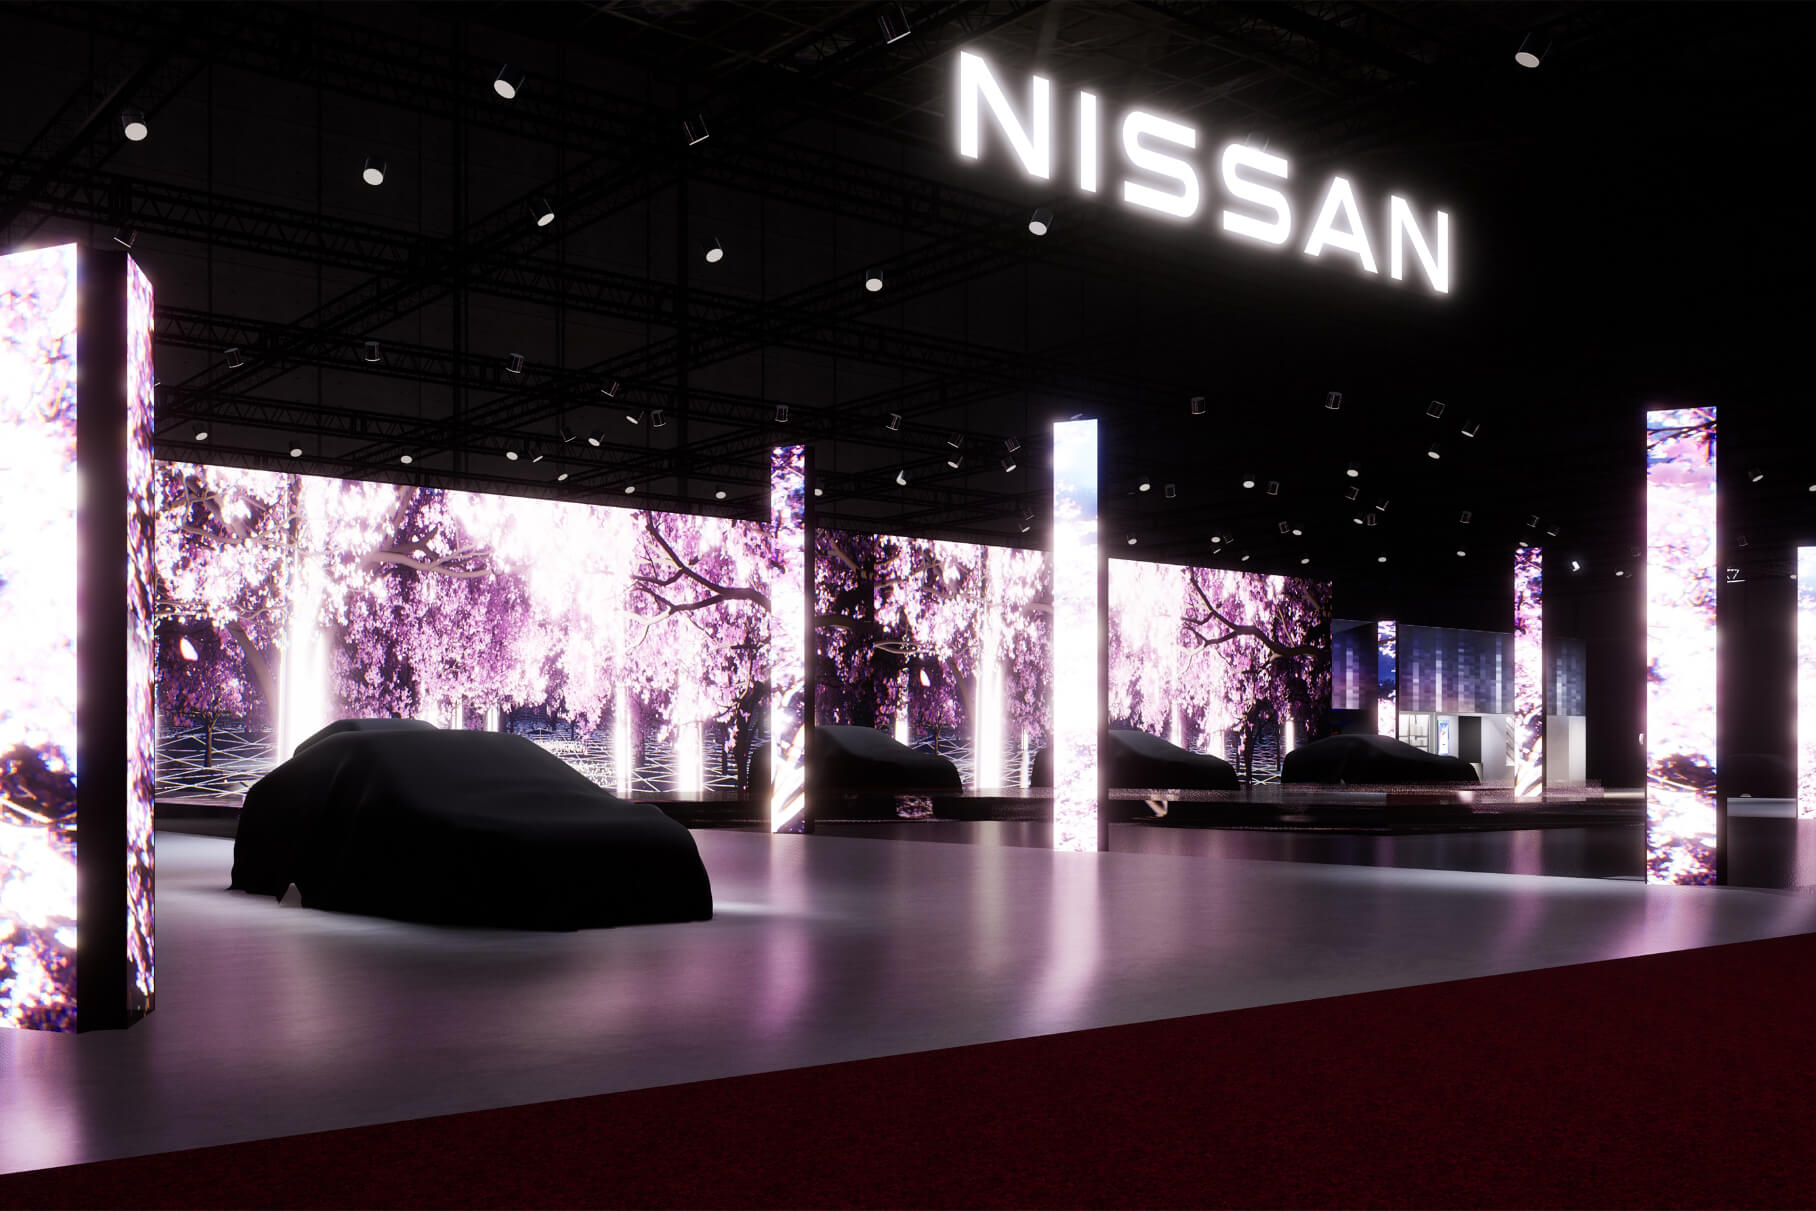 Nissan and Renault, which left Russia, will equalize their roles in the alliance